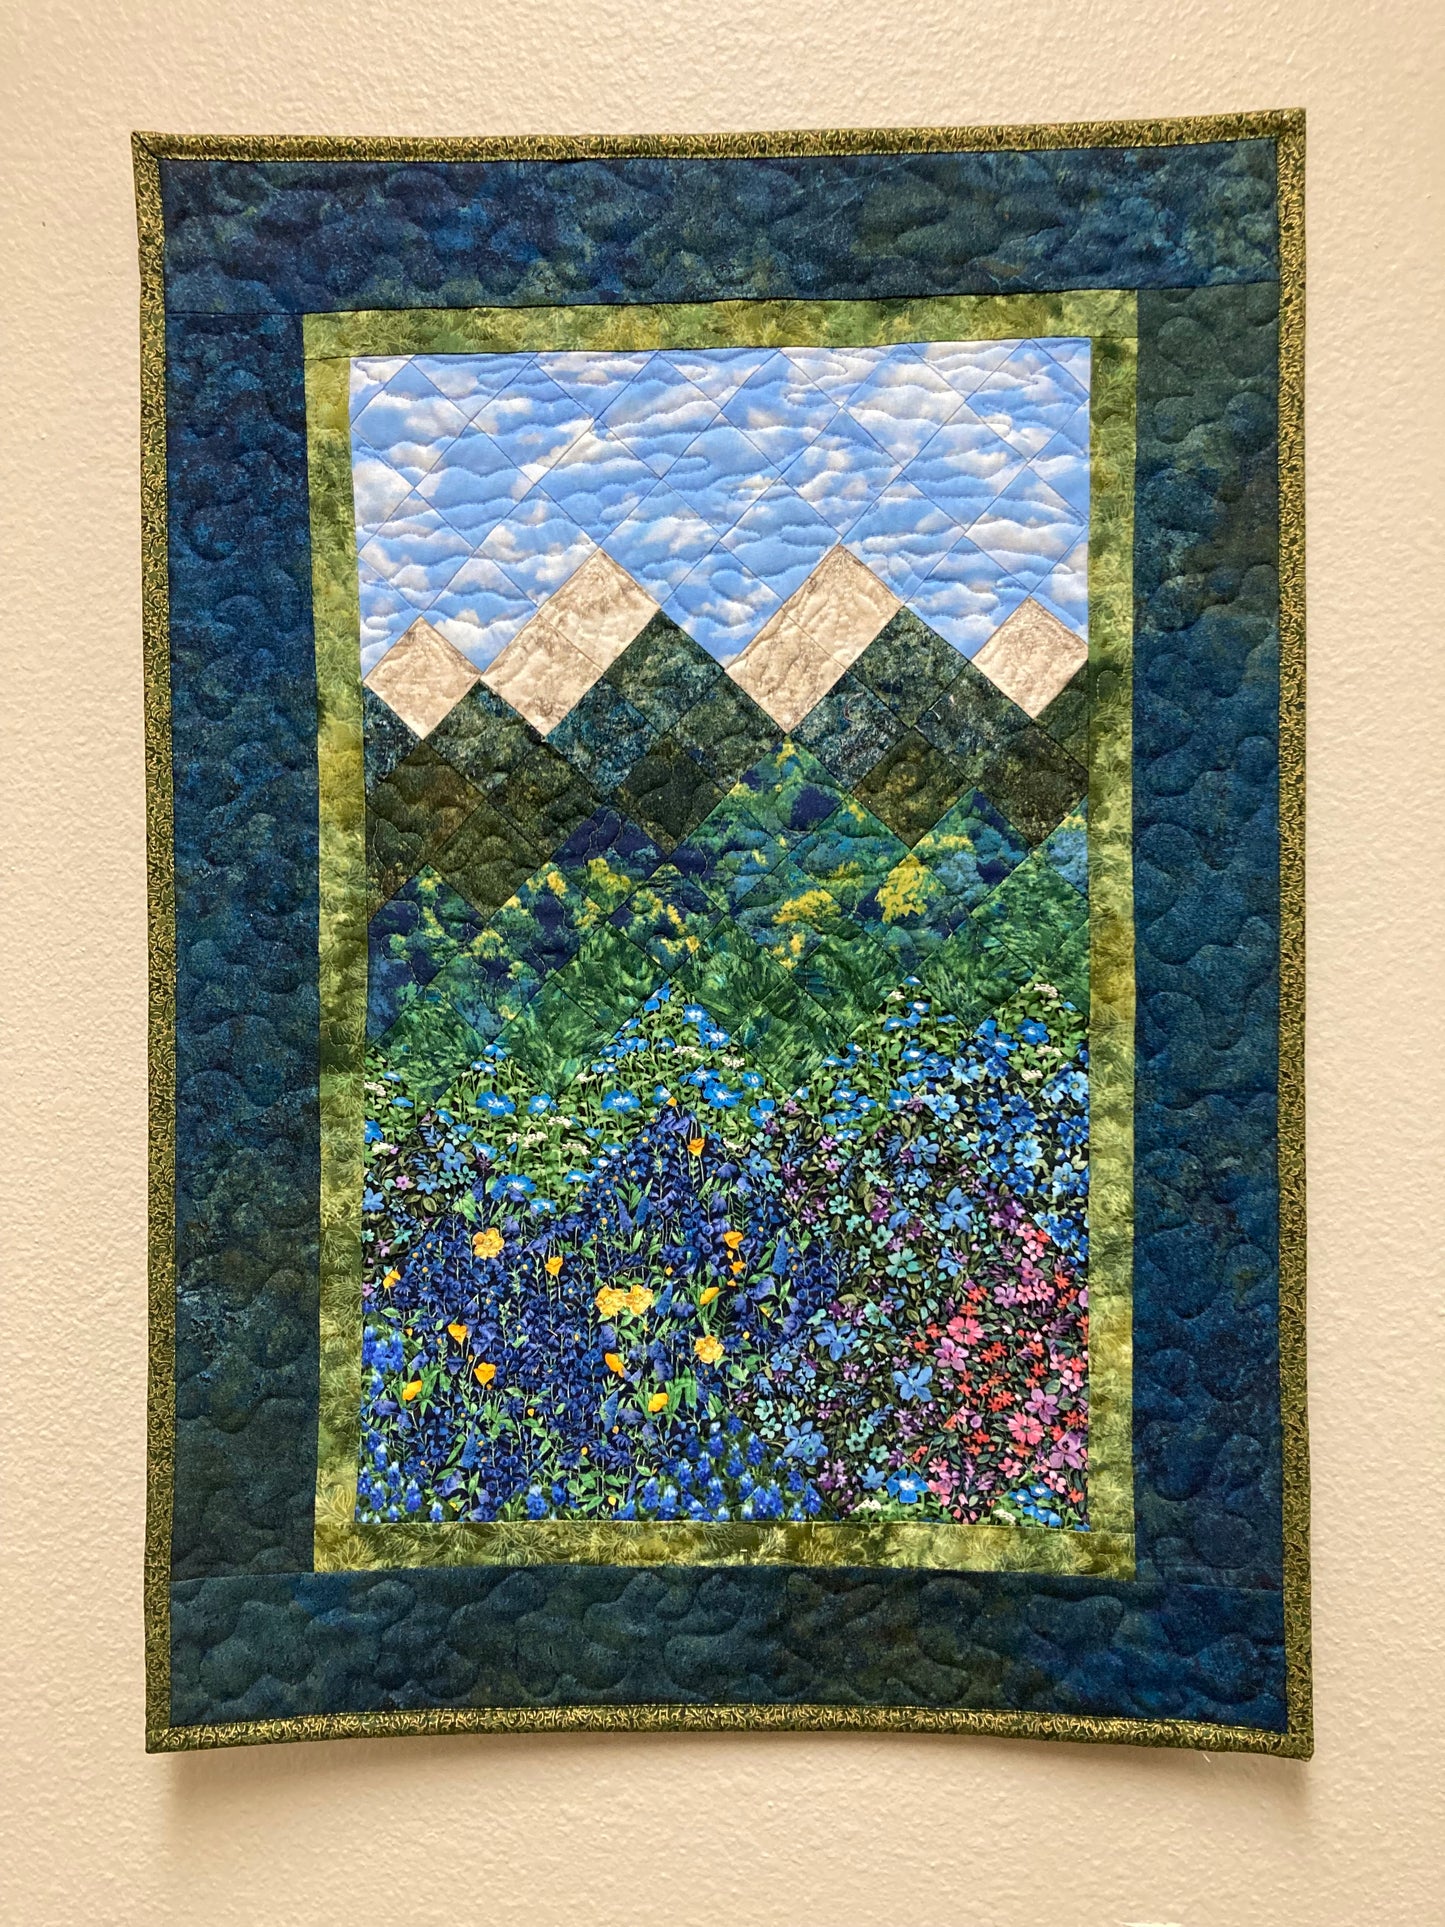 Summer Wildflower Mountain Art Quilt Fabric Wall Hanging, Landscape Vertical Quilted 19x27” Tapestry, Nature Narrow Meadow Pine Trees Alpine